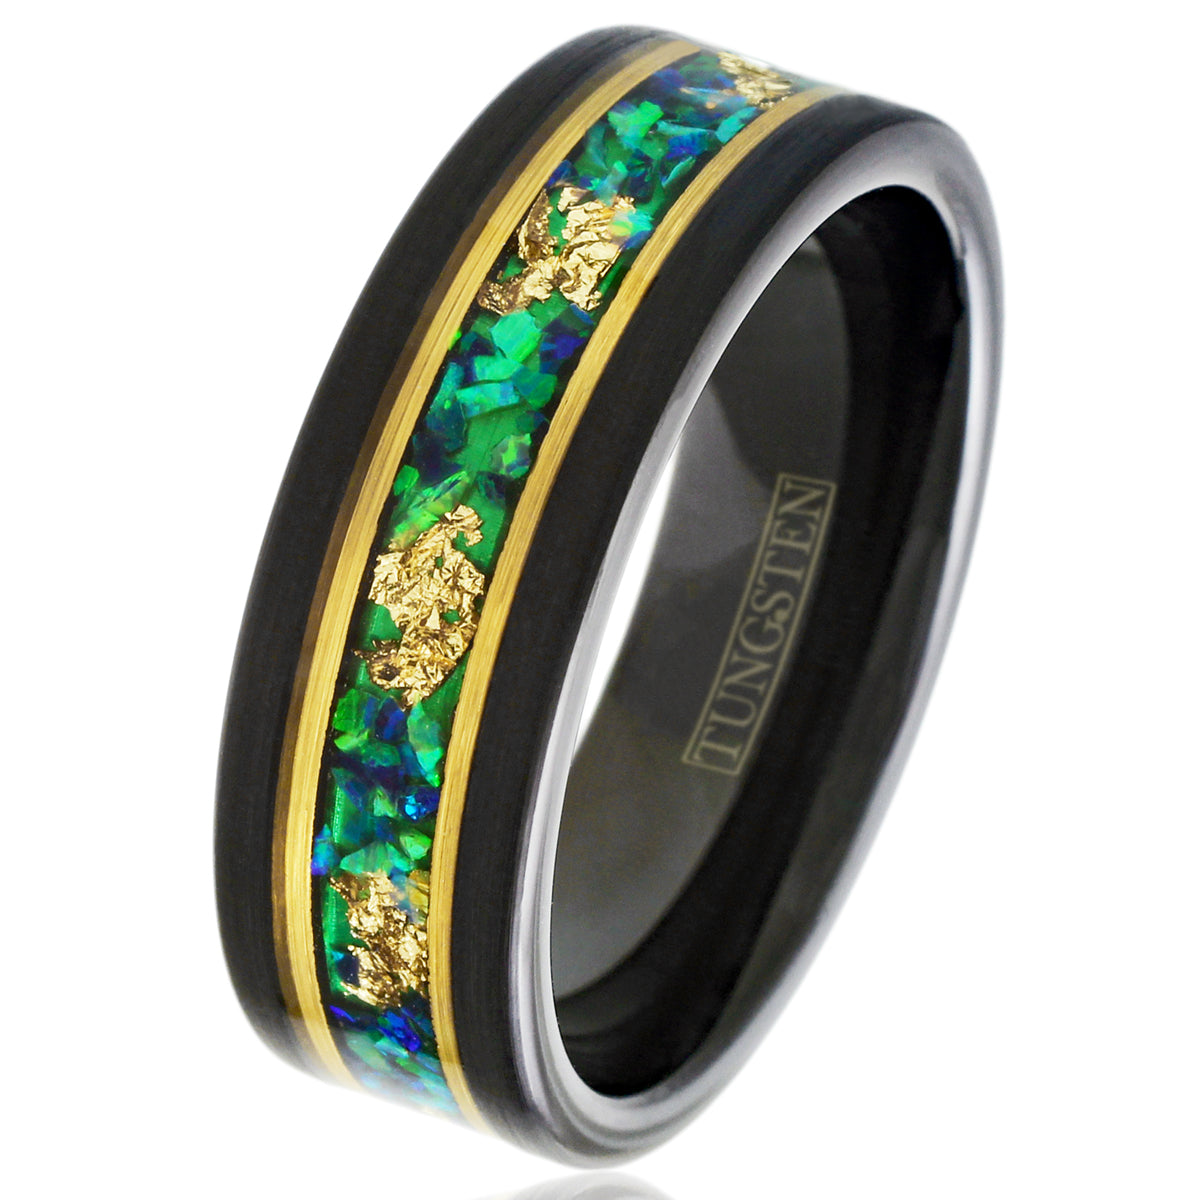 Stunning Faceted Brushed Finish Black Tungsten Flat Band Ring with Gold Leaf and Crushed Green Opal Inlay Between Rose Gold Stripes.